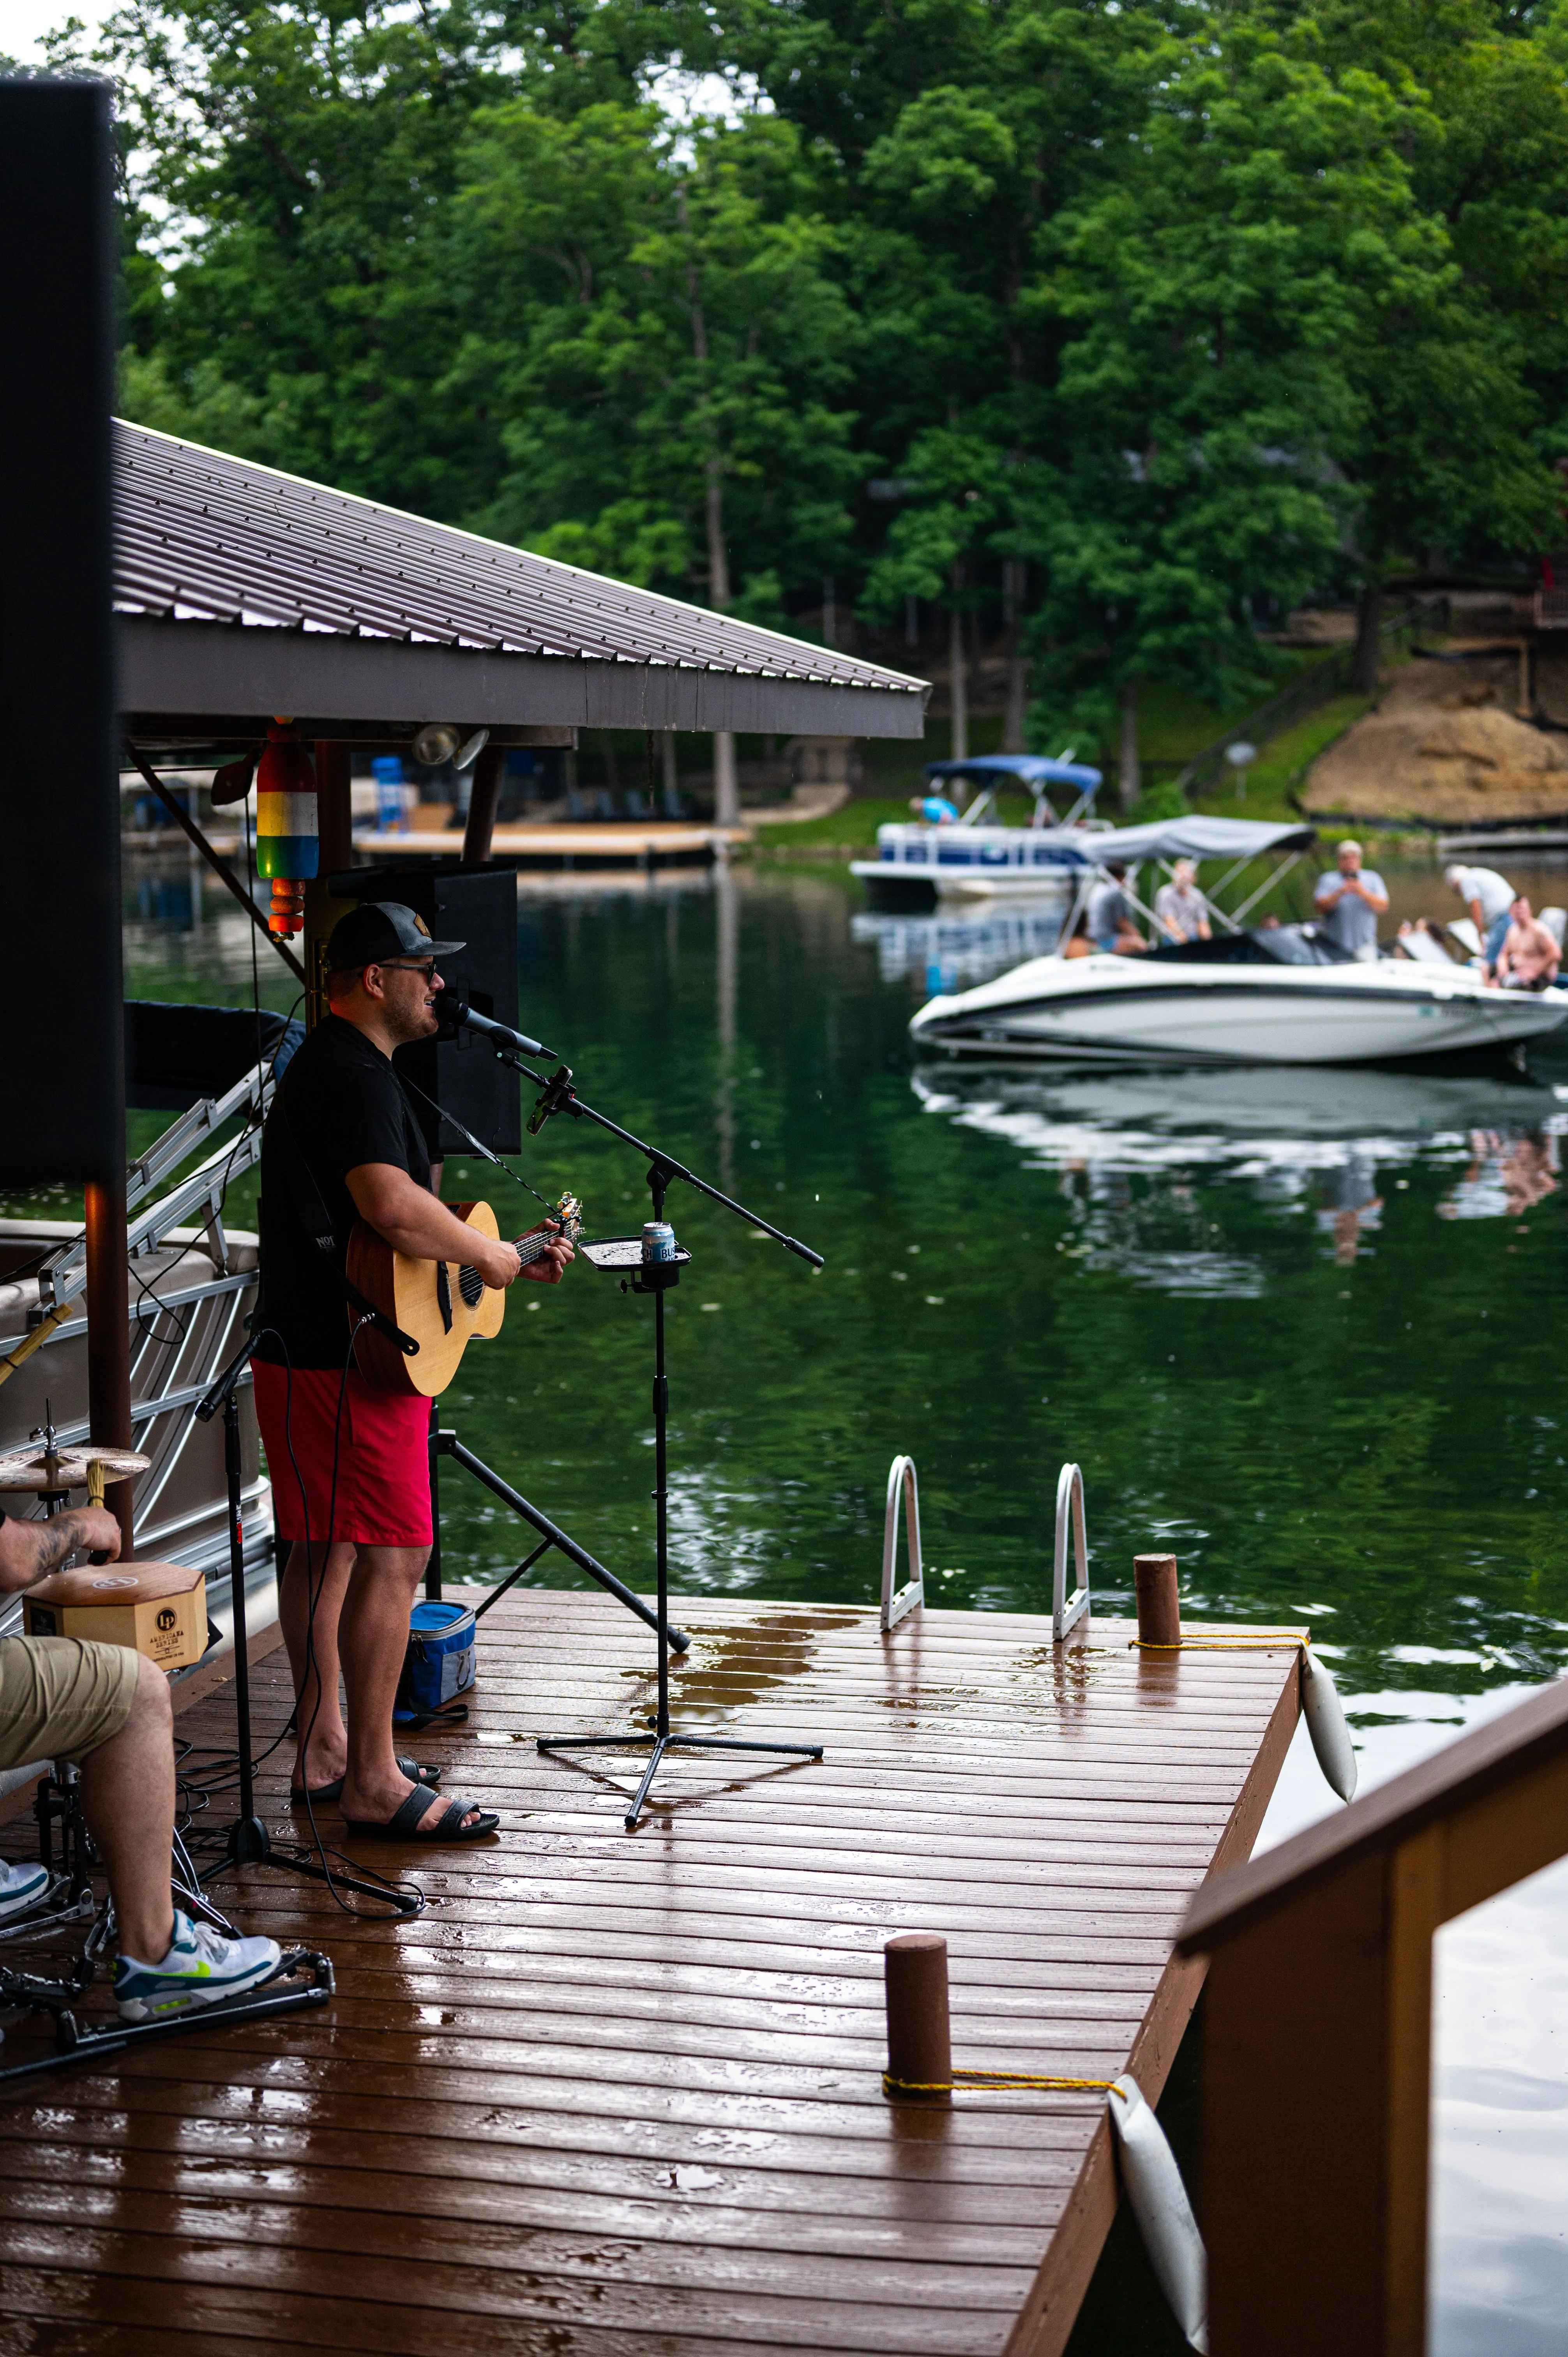 Musician playing guitar on a dock by the lake with boats in the background.